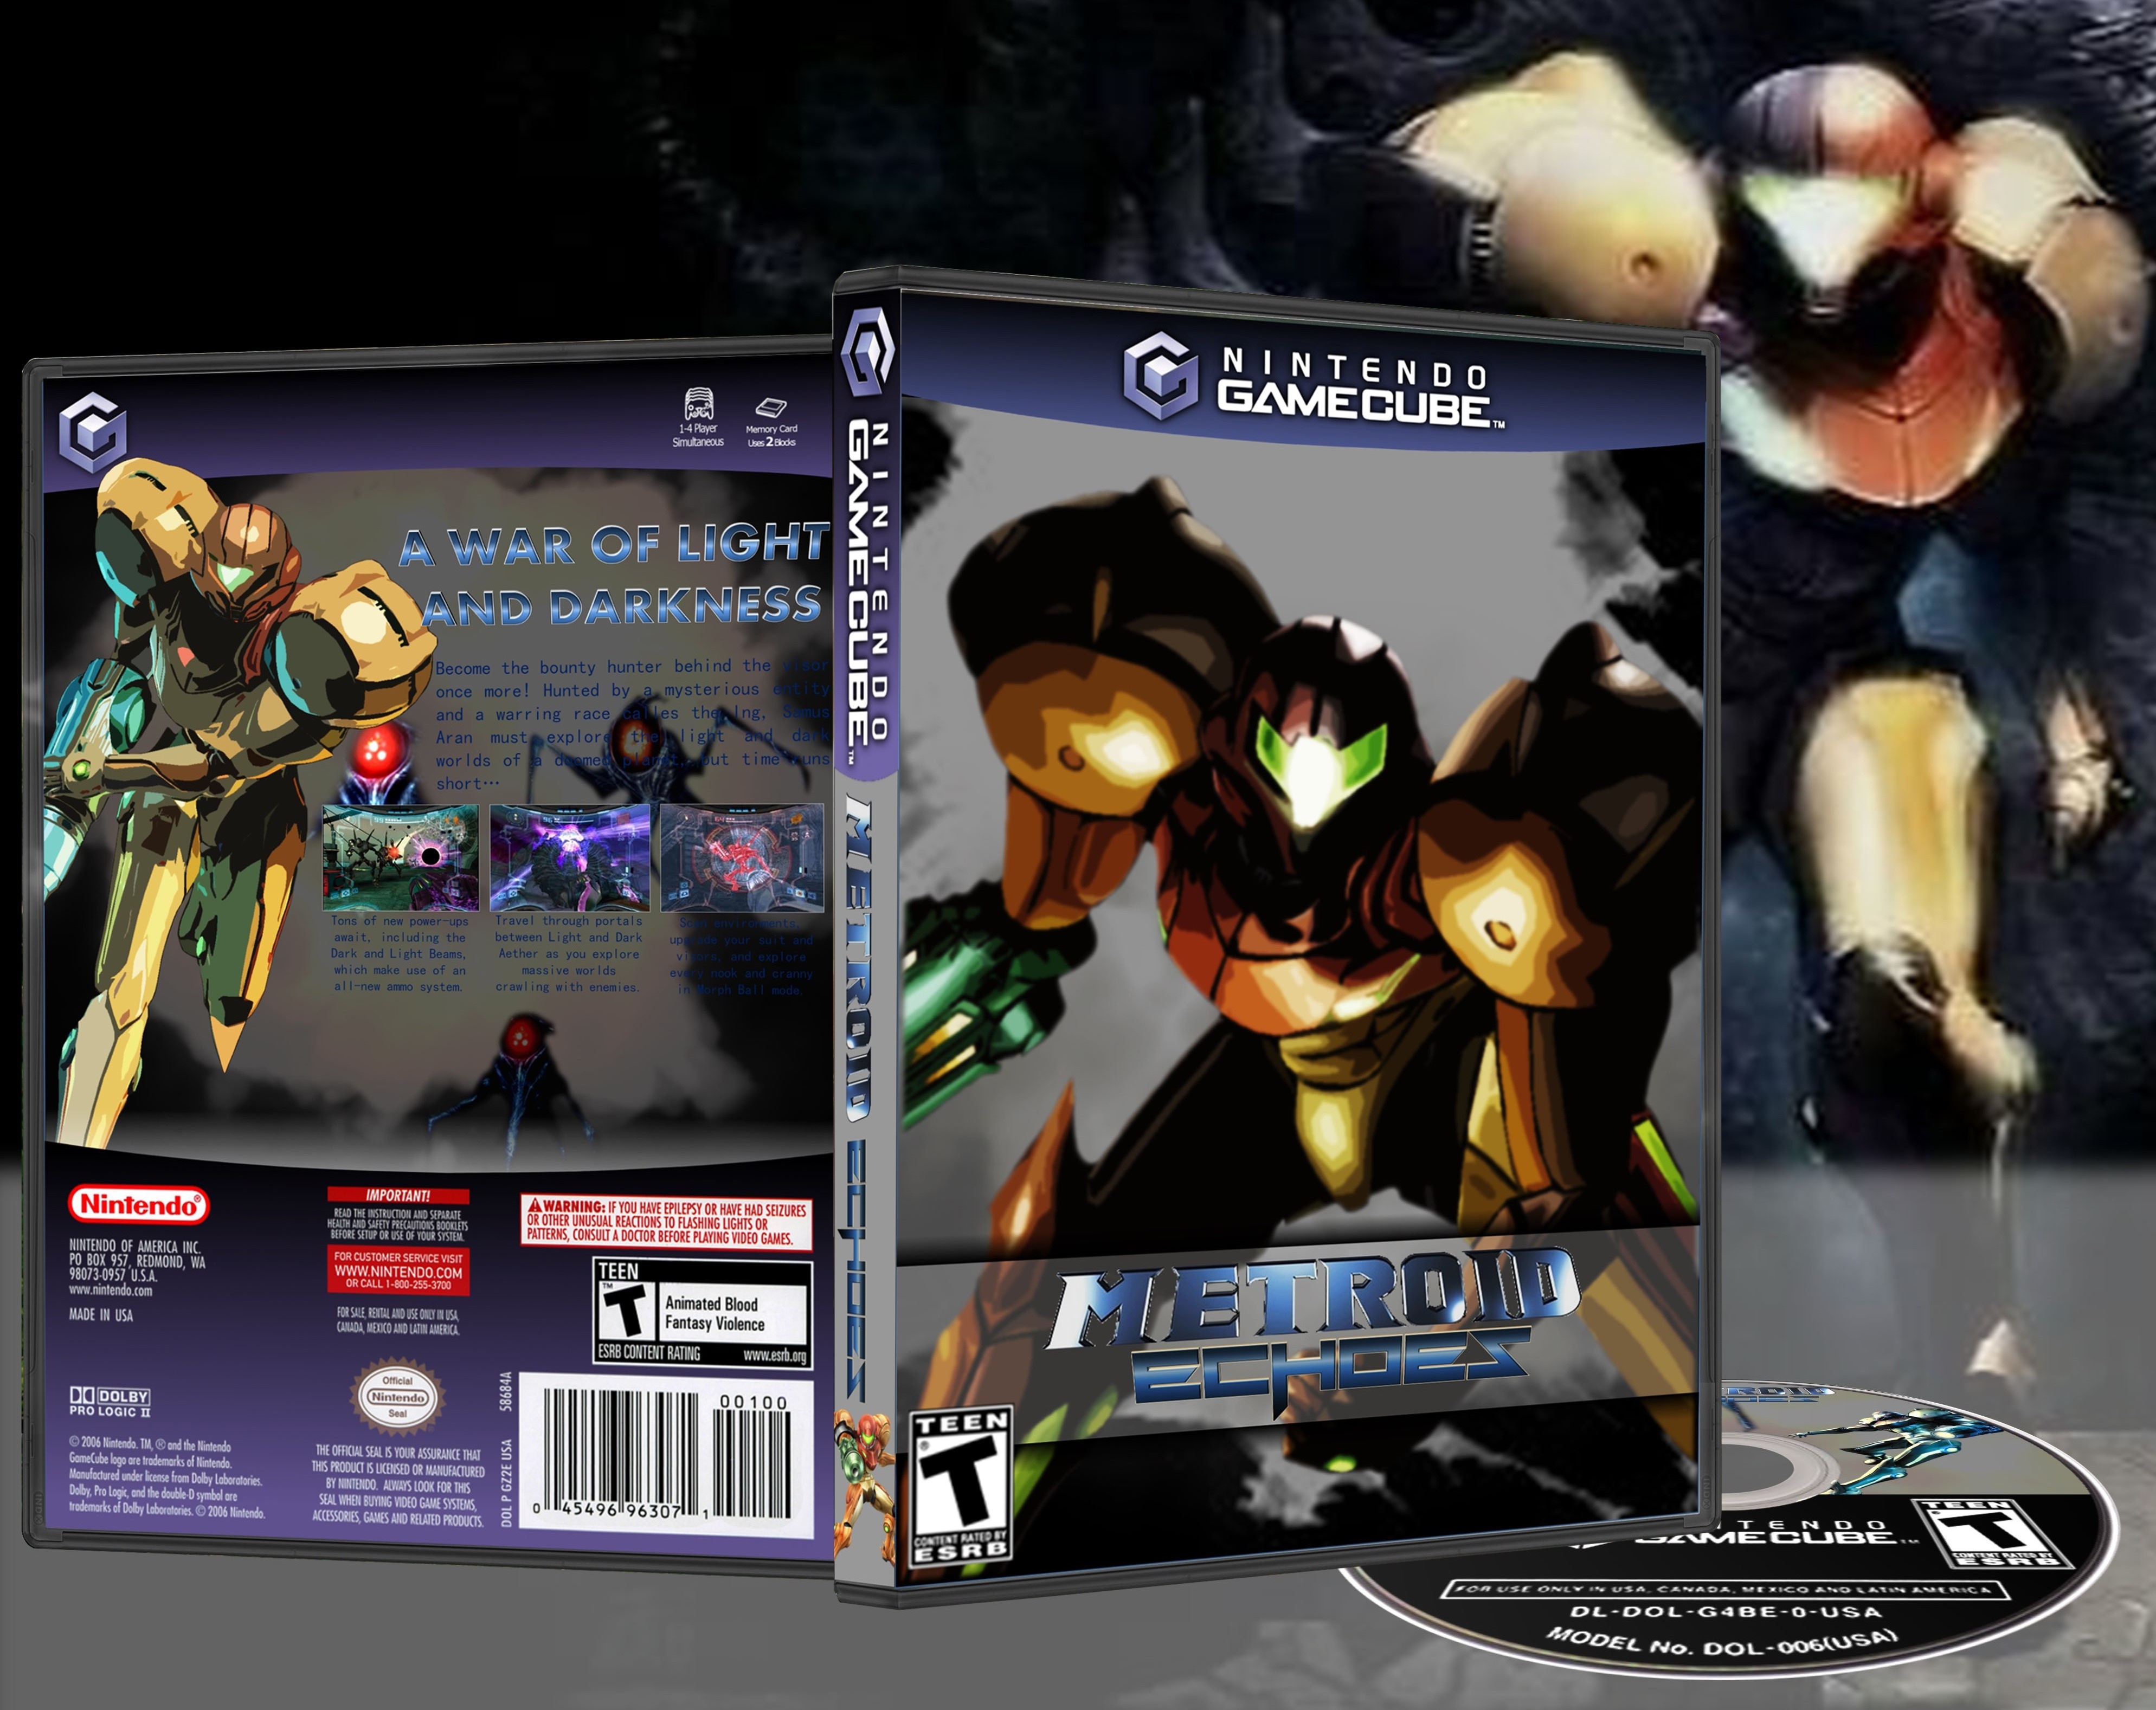 Metroid Prime 2 Echoes box cover